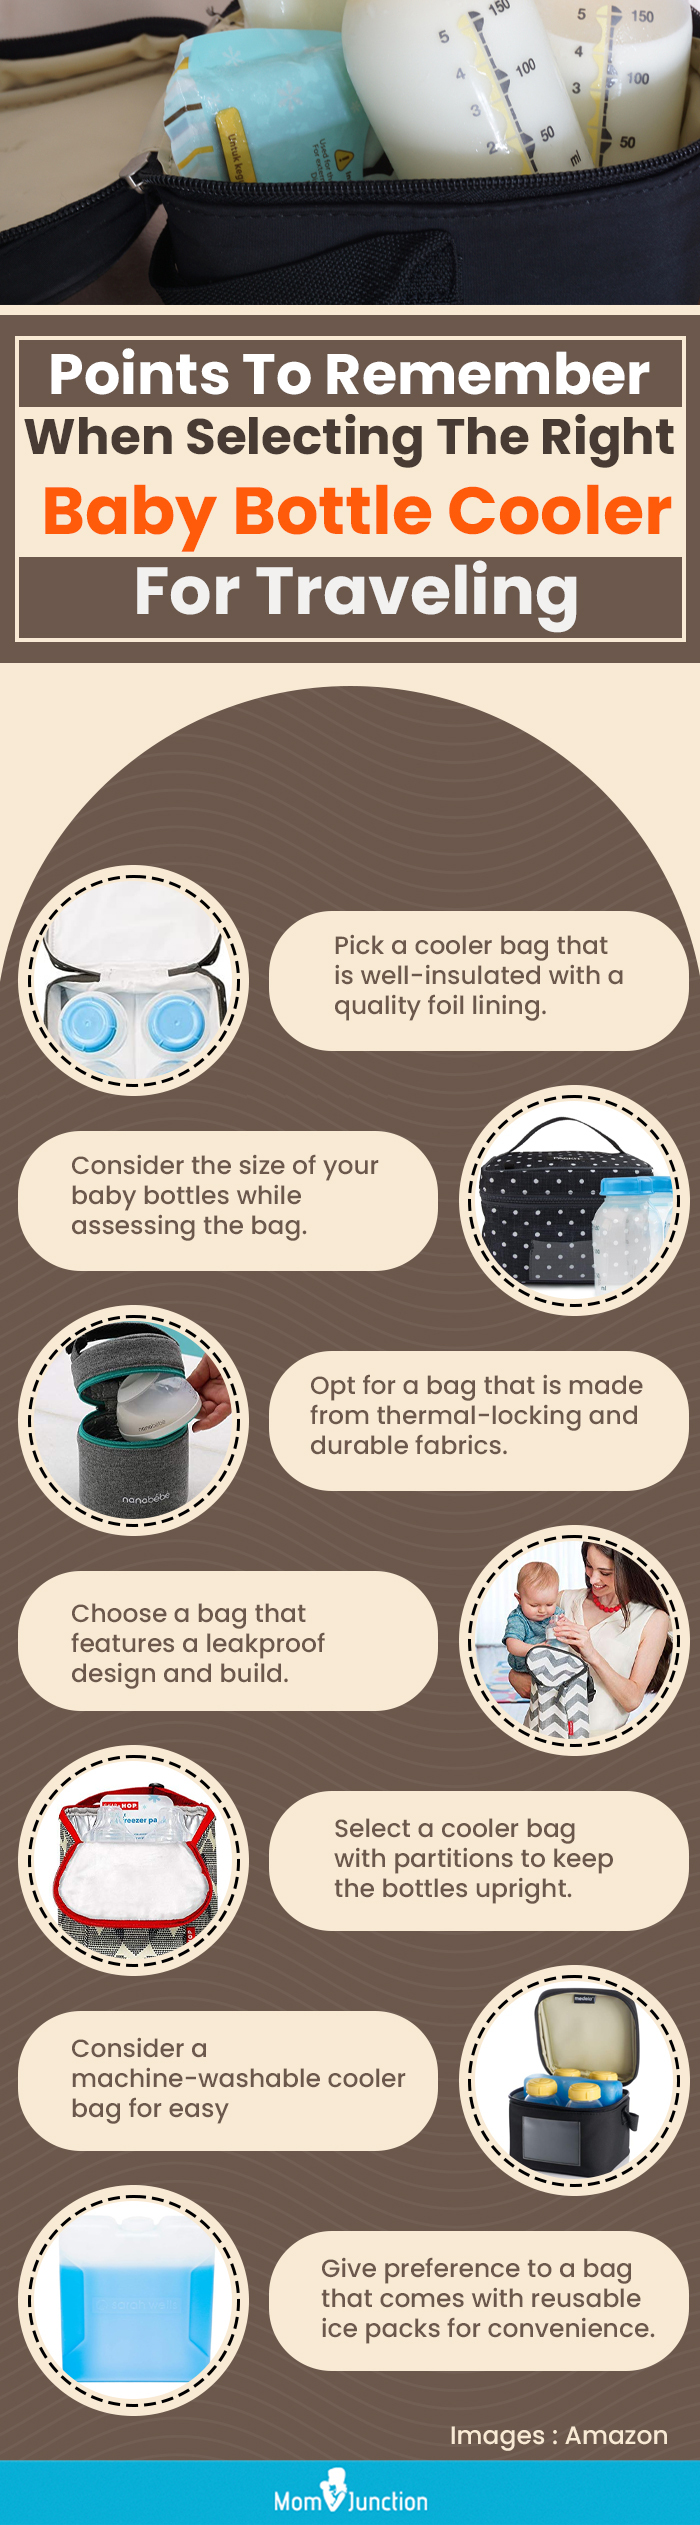 Points To Remember When Selecting The Right Baby Bottle Cooler For Traveling (infographic)